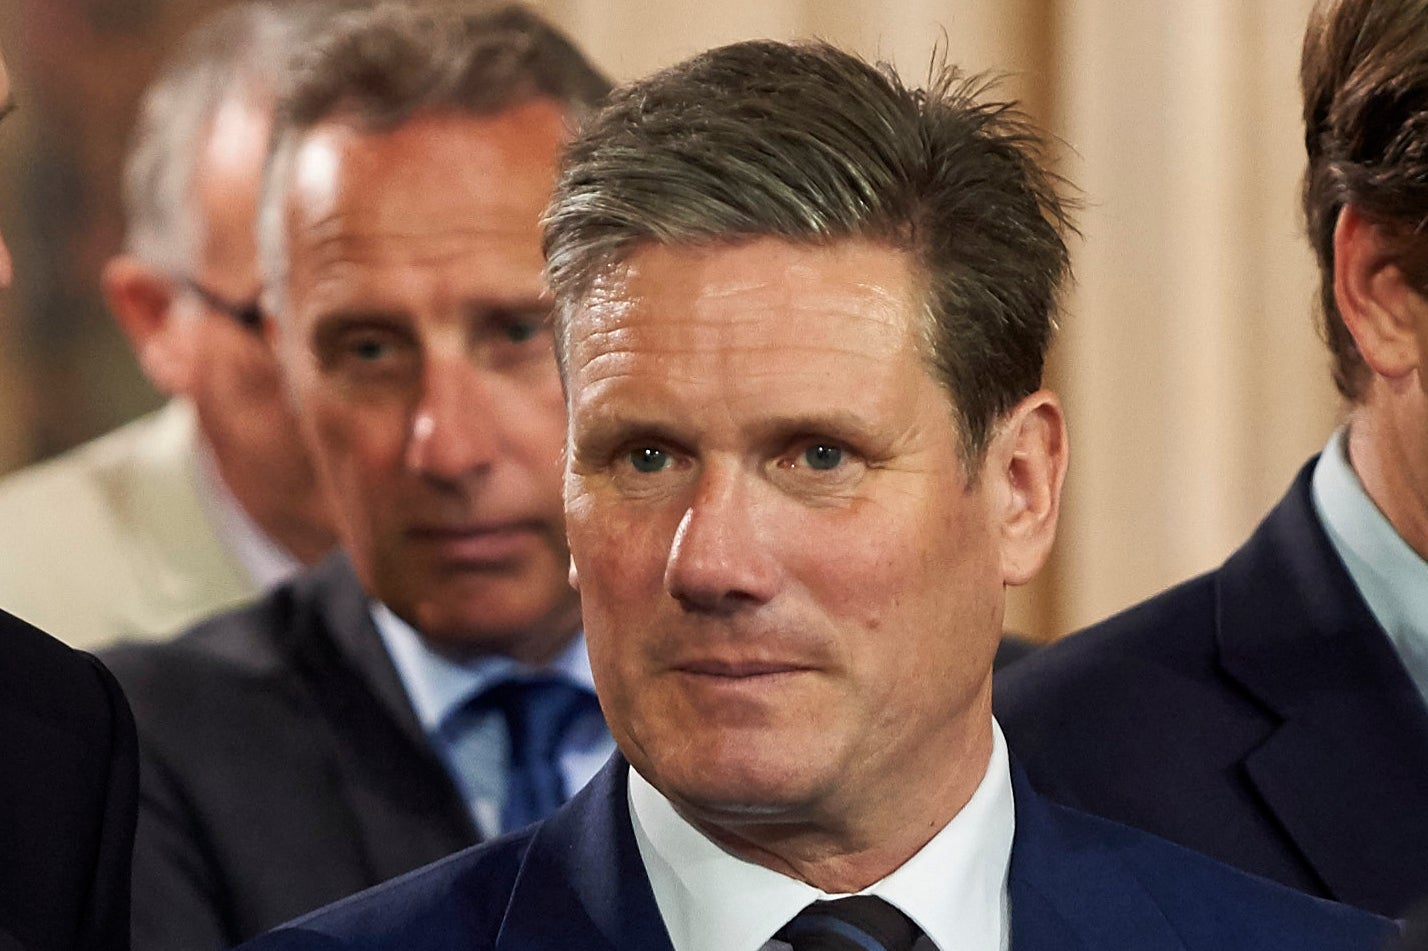 Keir Starmer, the shadow Brexit secretary, has attempted to position Labour as the party of "soft Brexit"